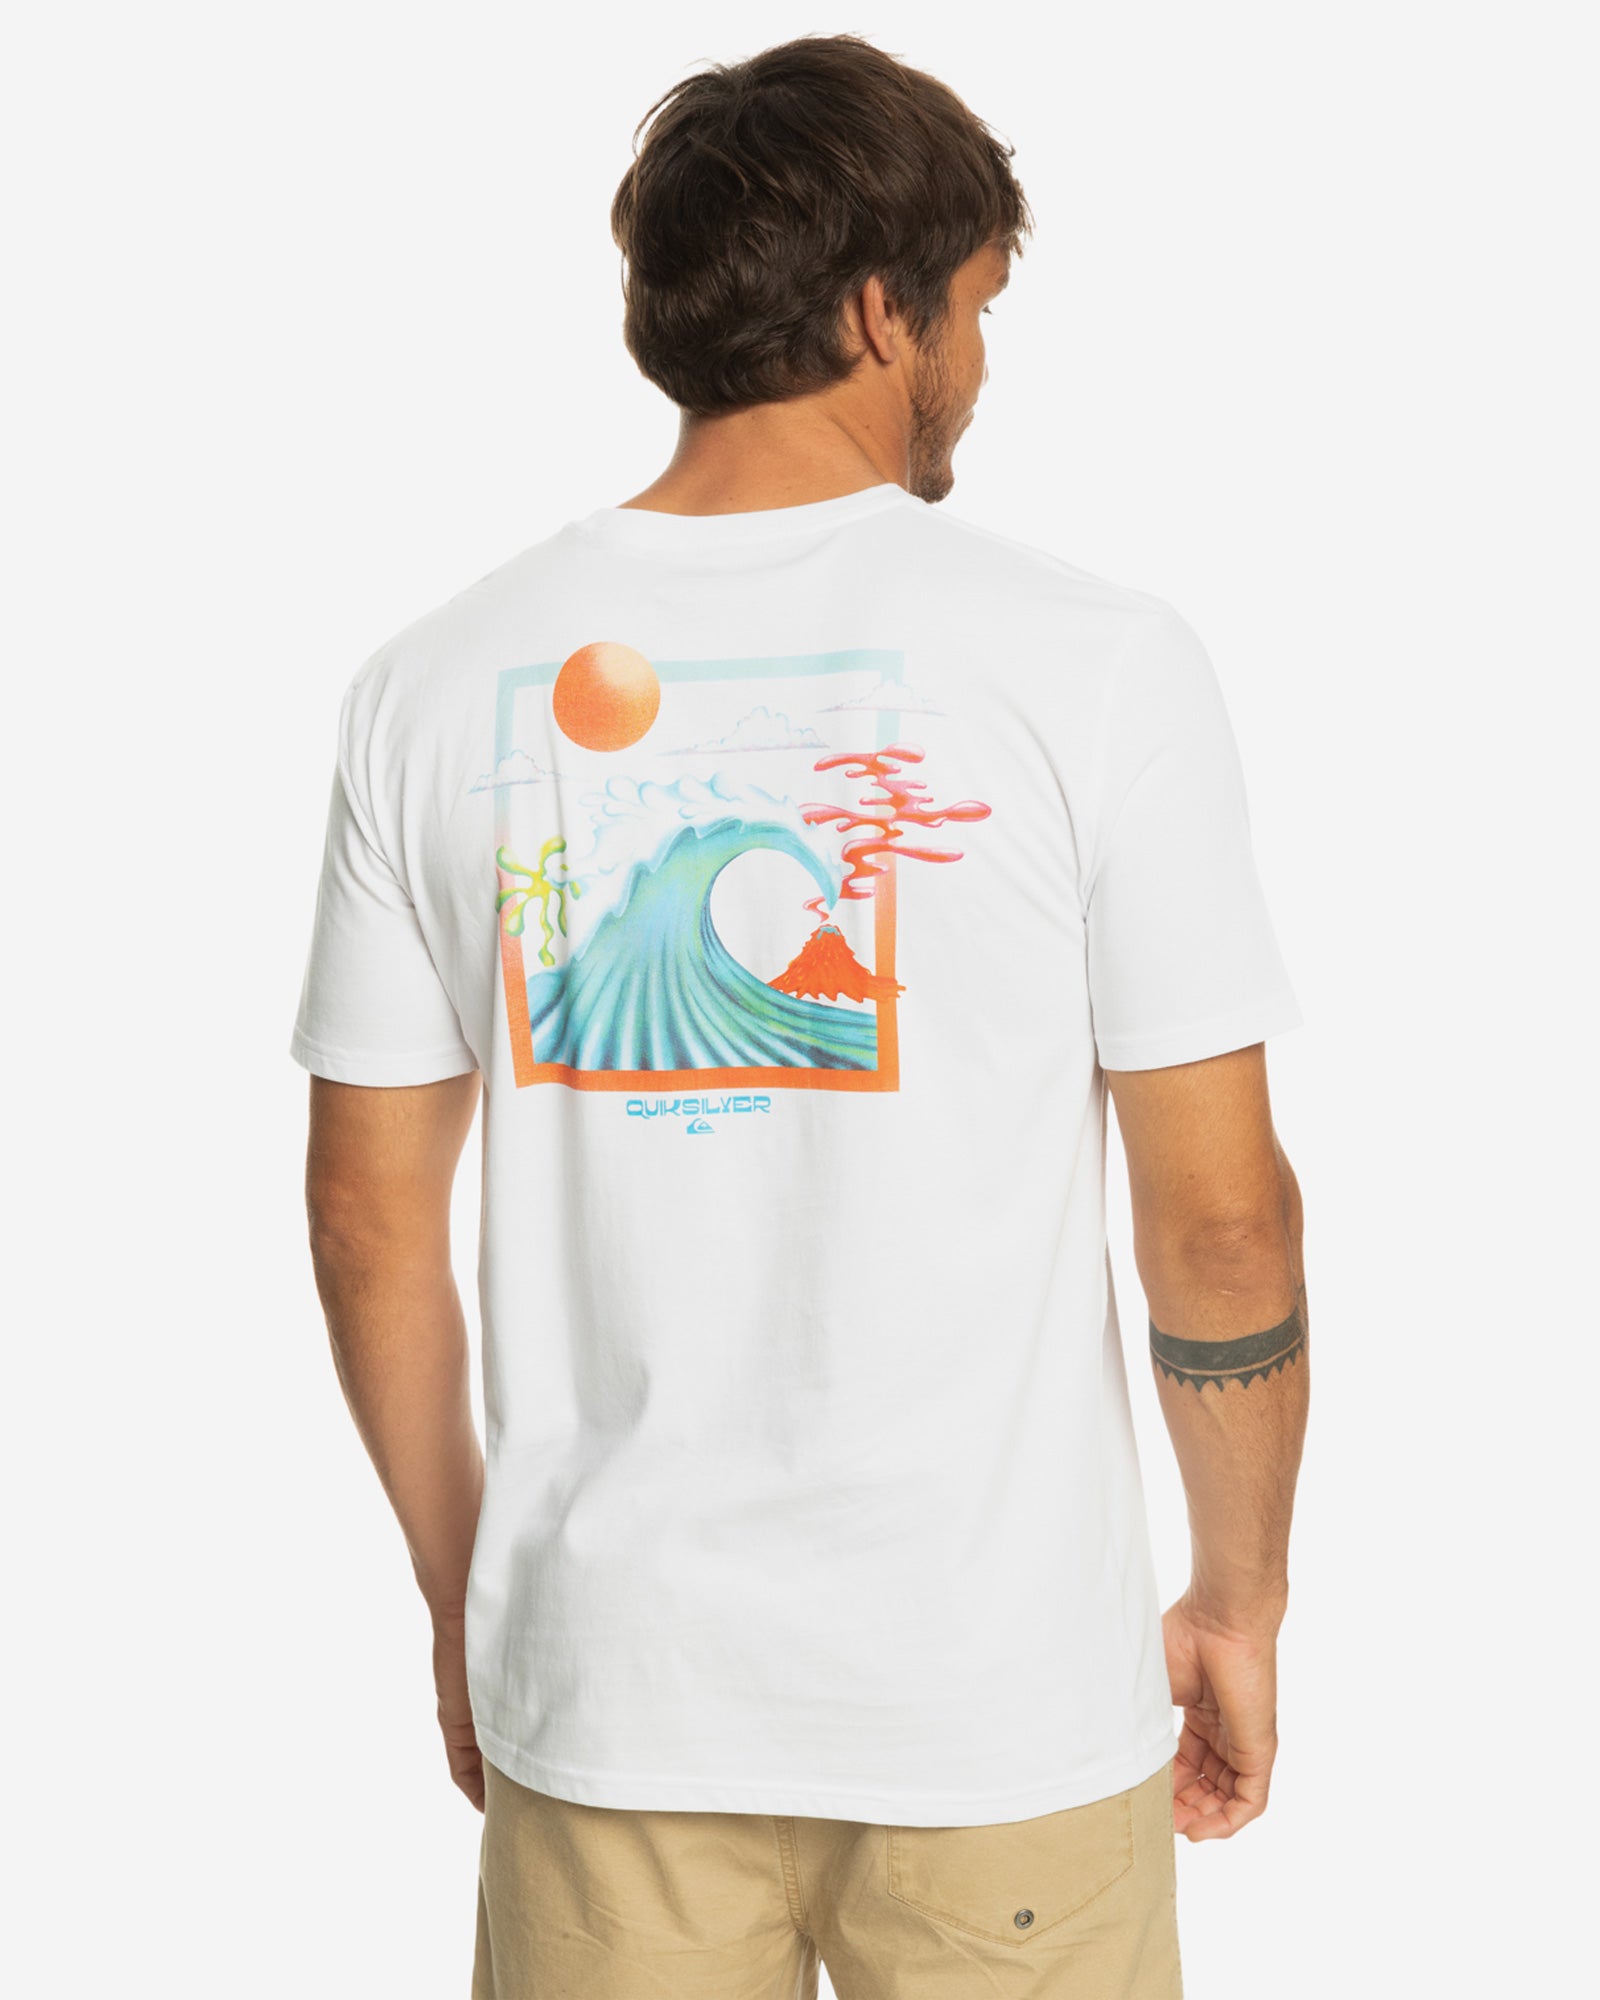 It doesn't get more epic than the Ocean Bed t-shirt. Intense art and the comfort of combed cotton make it a surfer's favorite.